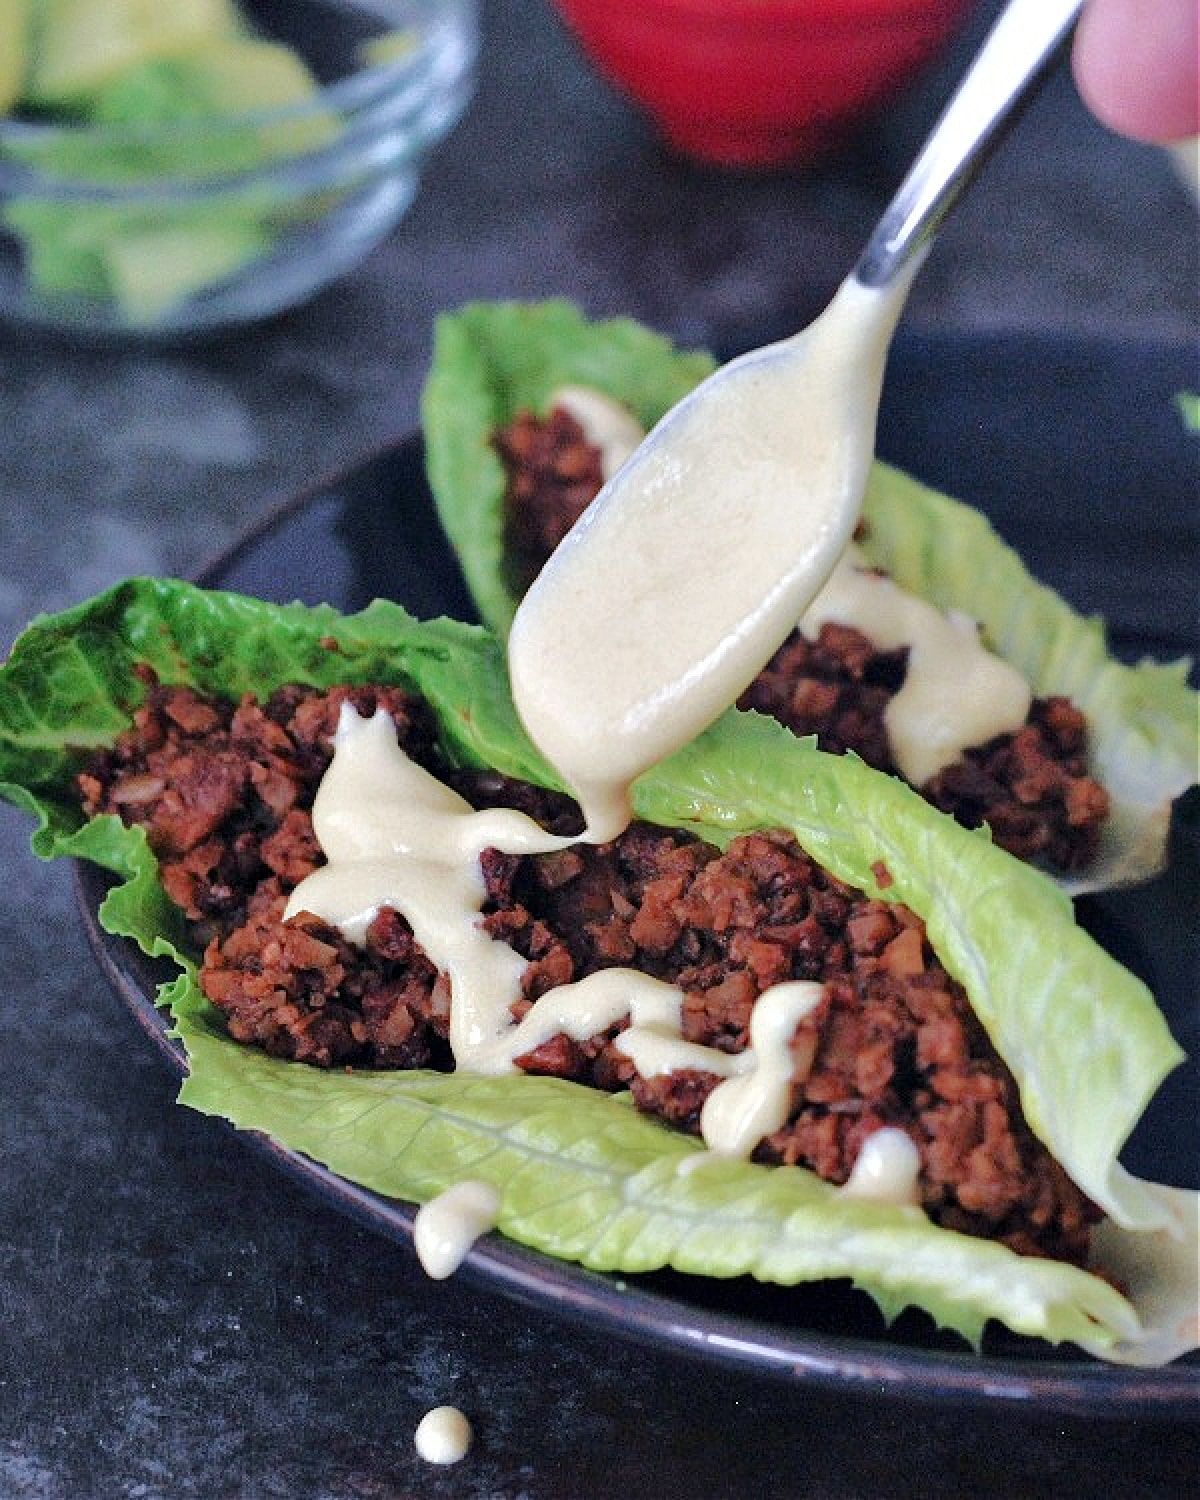 Vegan chorizo sausage in lettuce wraps with avocado slices and dairy free cheese sauce being spooned on top.